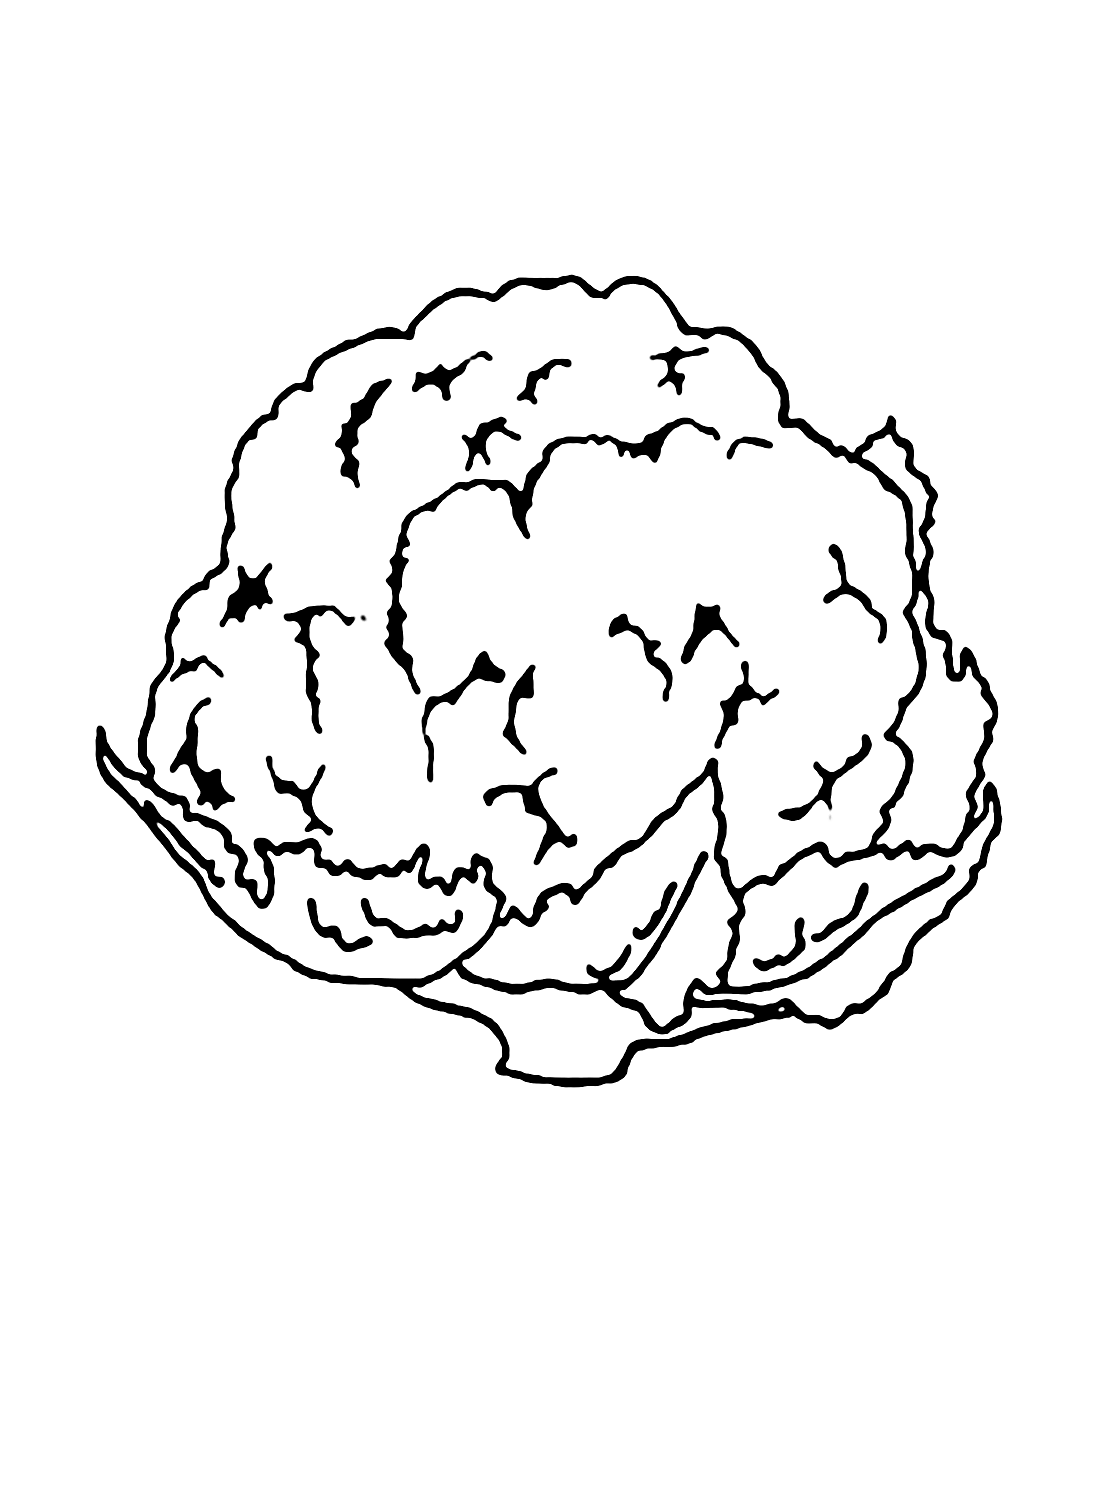 Cauliflower Coloring Pages Free from Cauliflower